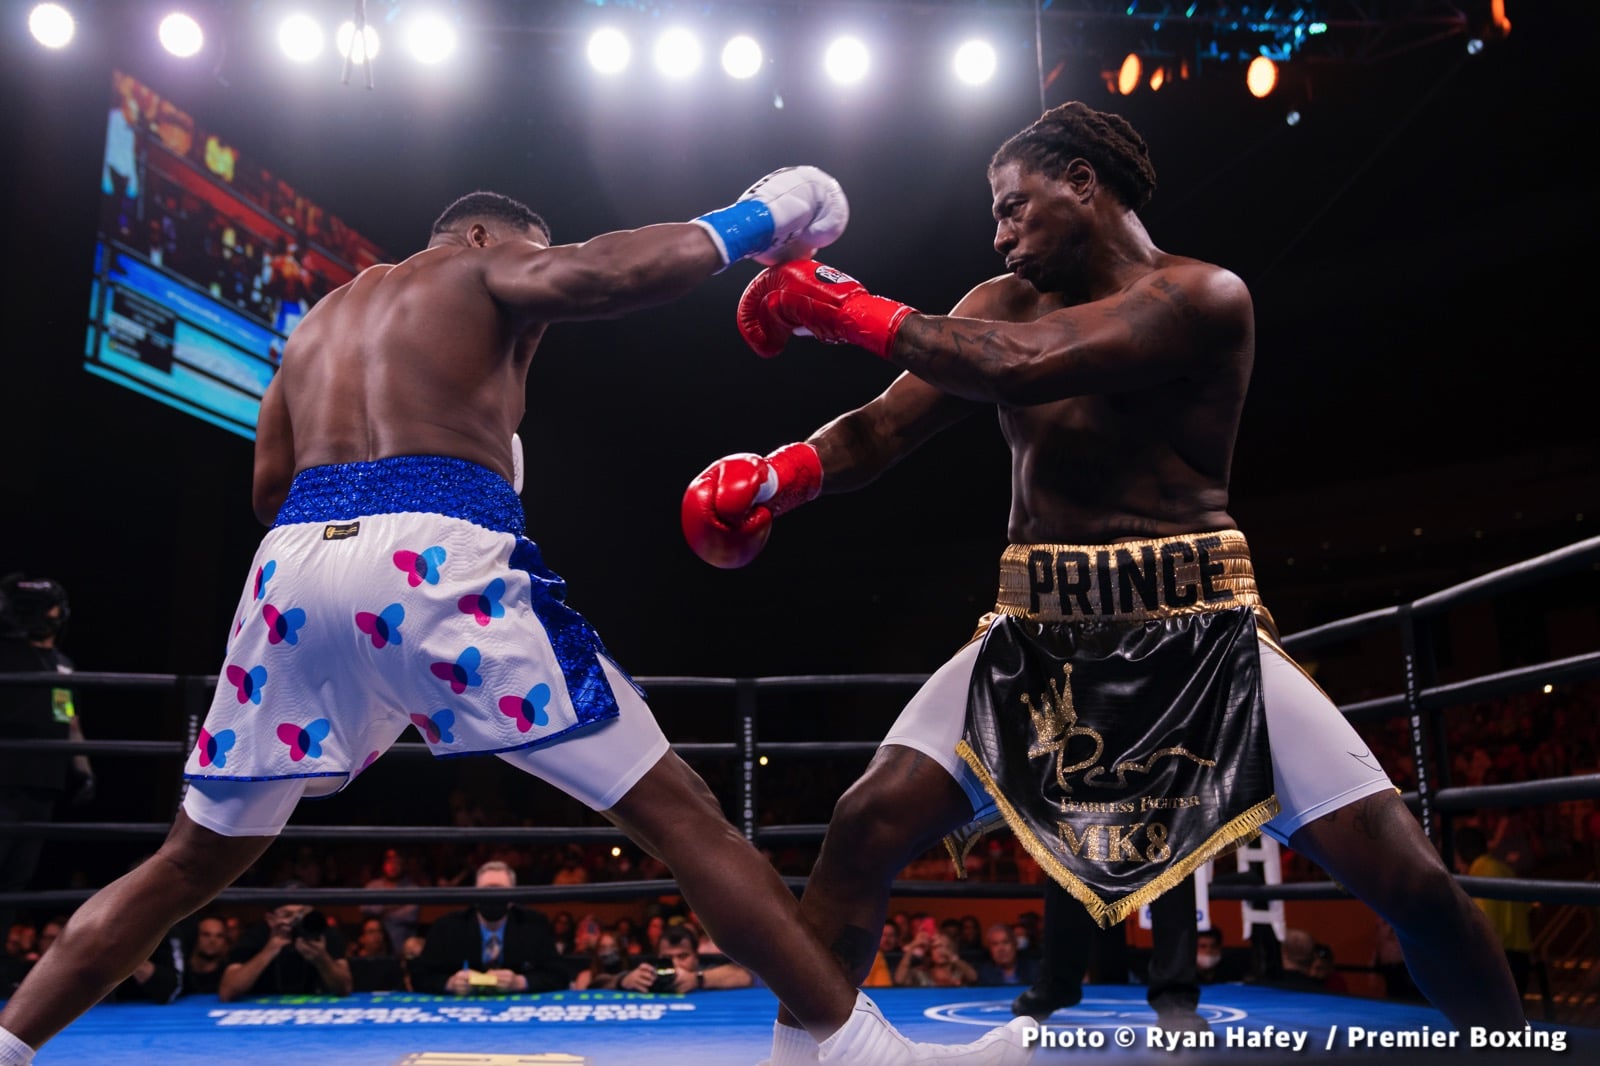 Luis Ortiz vs Martin Live Results From Hollywood, Florida